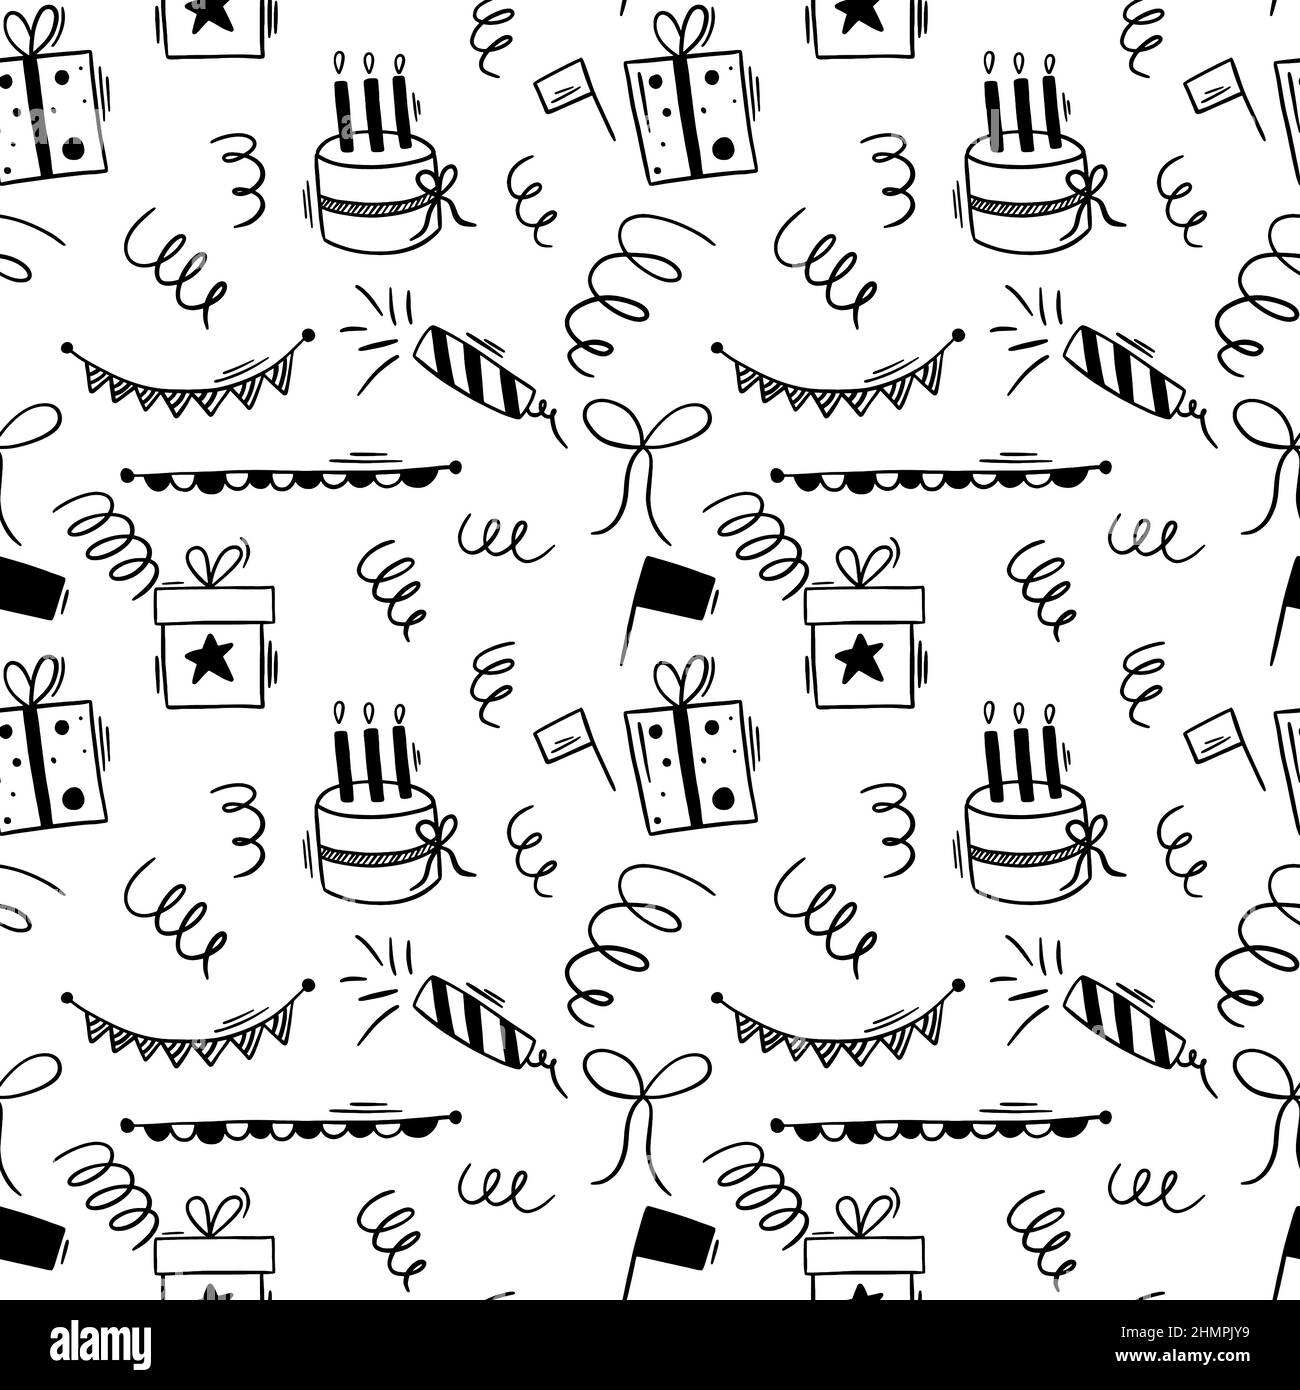 Happy birthday doodle black elements seamless pattern with birthday cake and garlands. Stock Vector